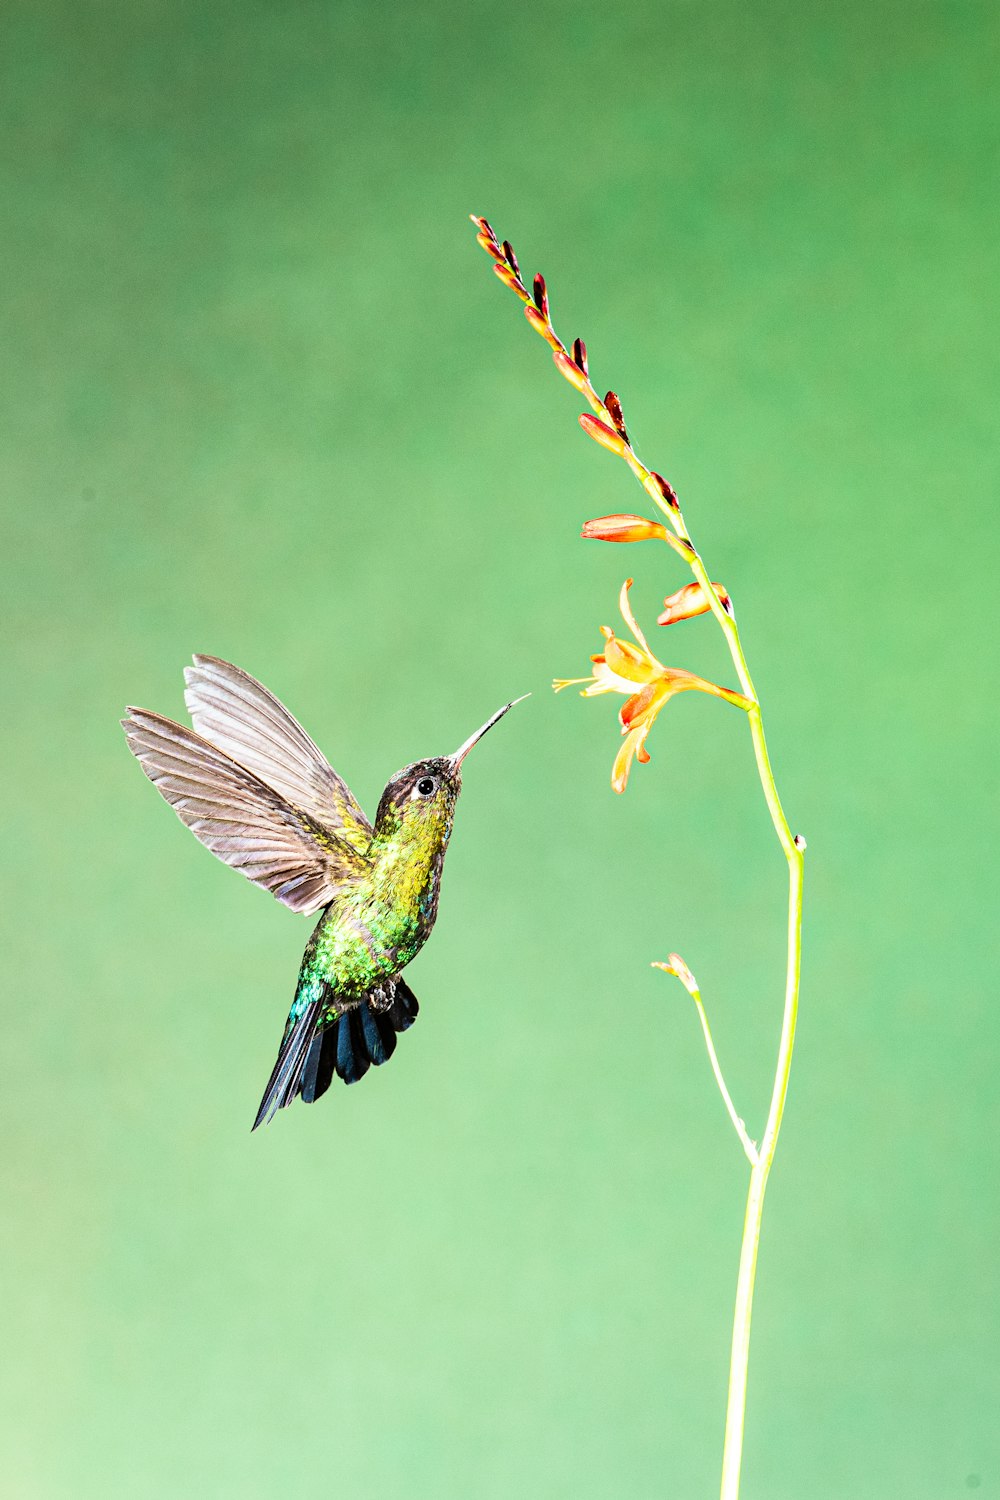 a hummingbird flying towards a flower with a green background